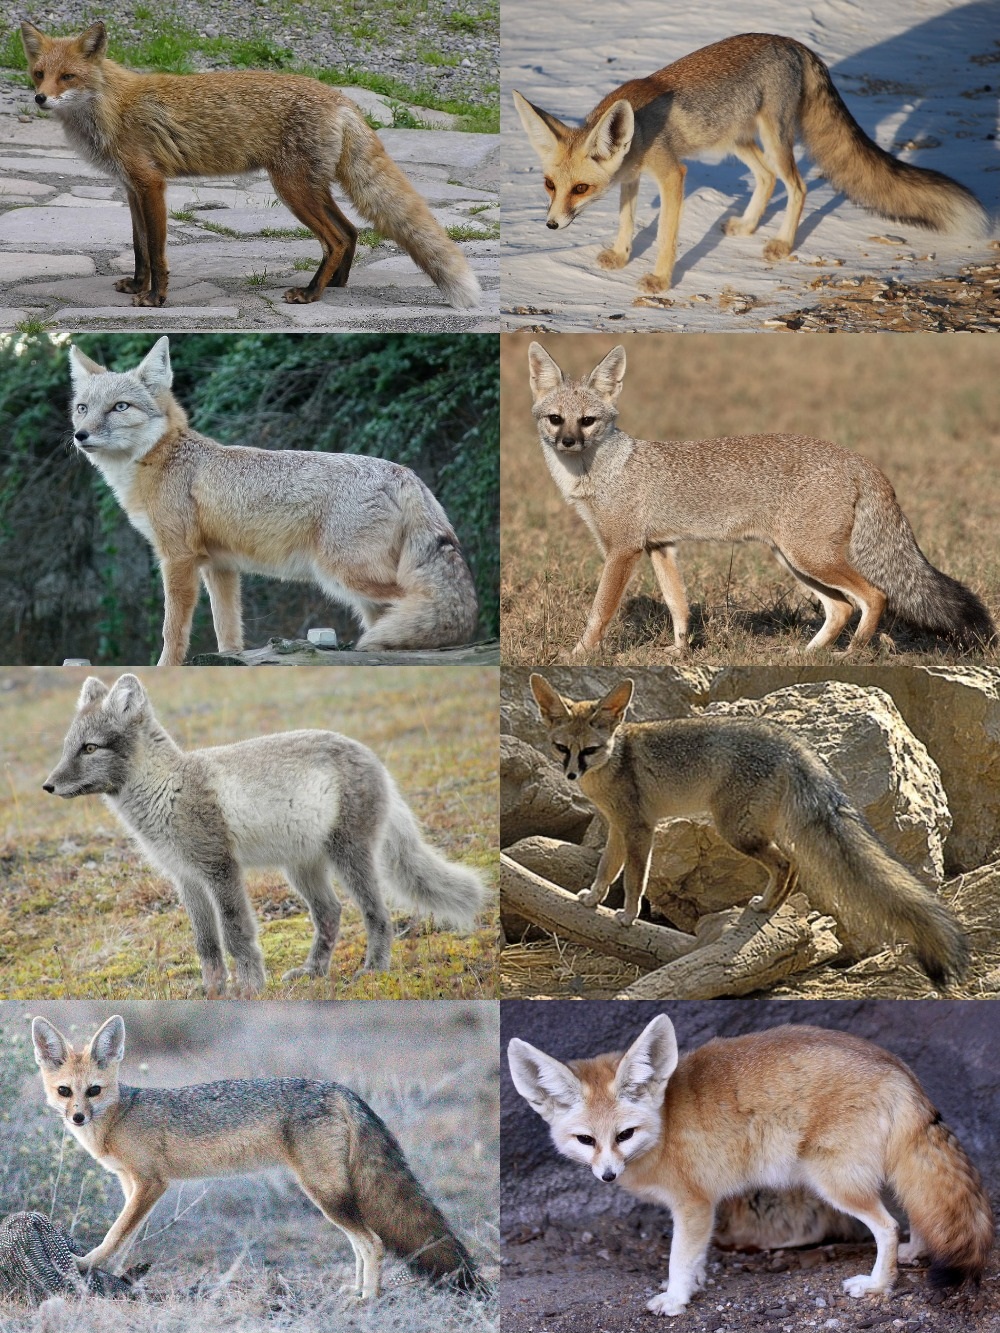 What kind of animal is a Fox?